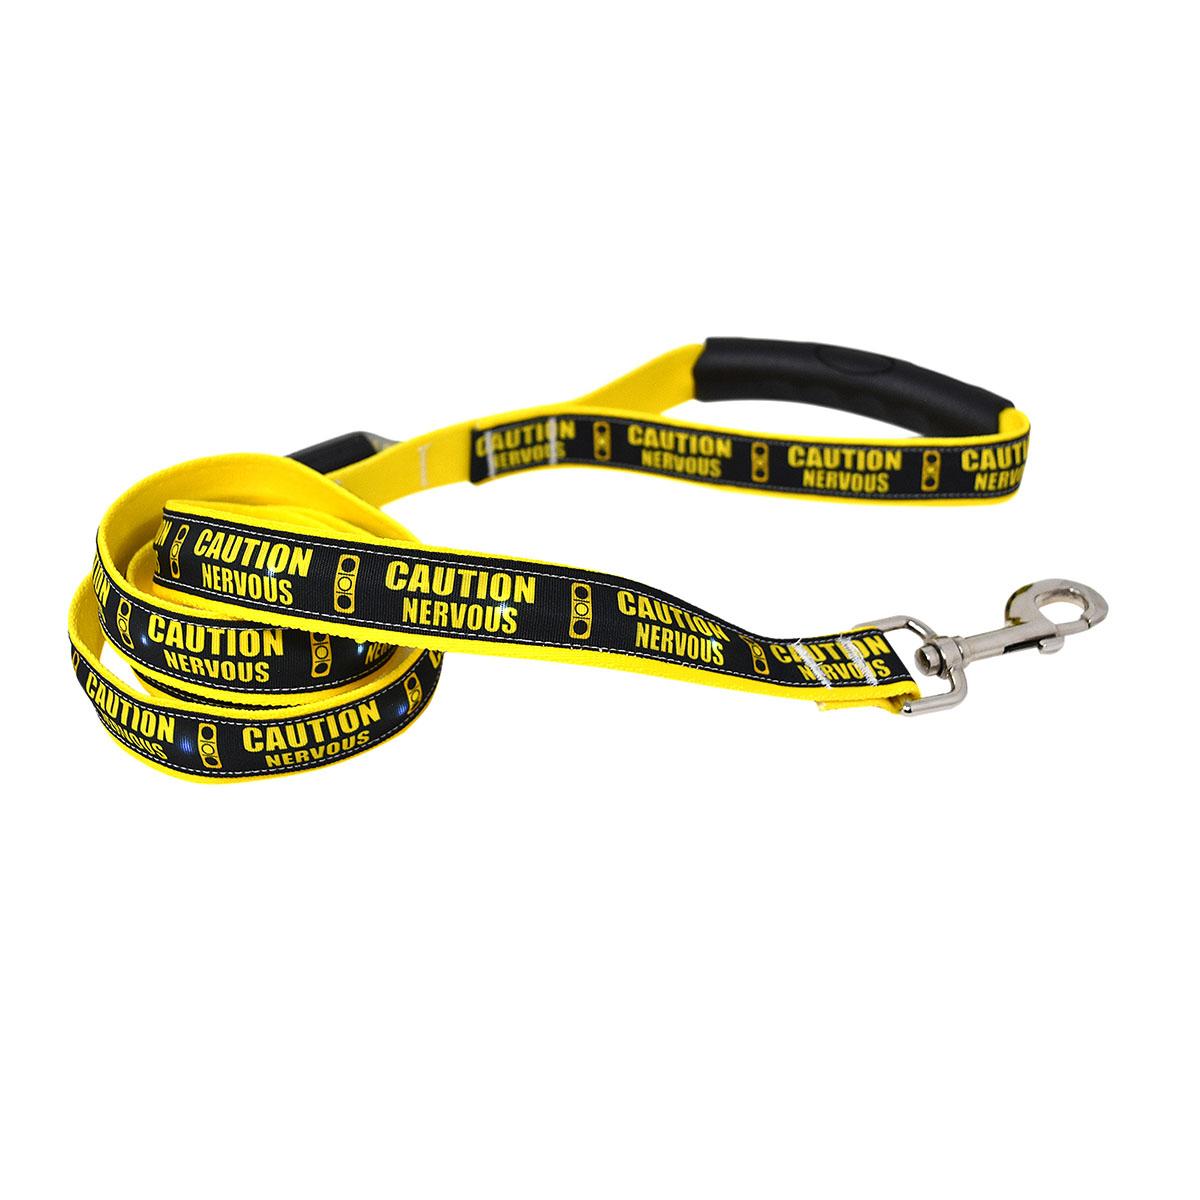 Caution Nervous Traffic Light ORION LED Dog Leash by Yellow Dog